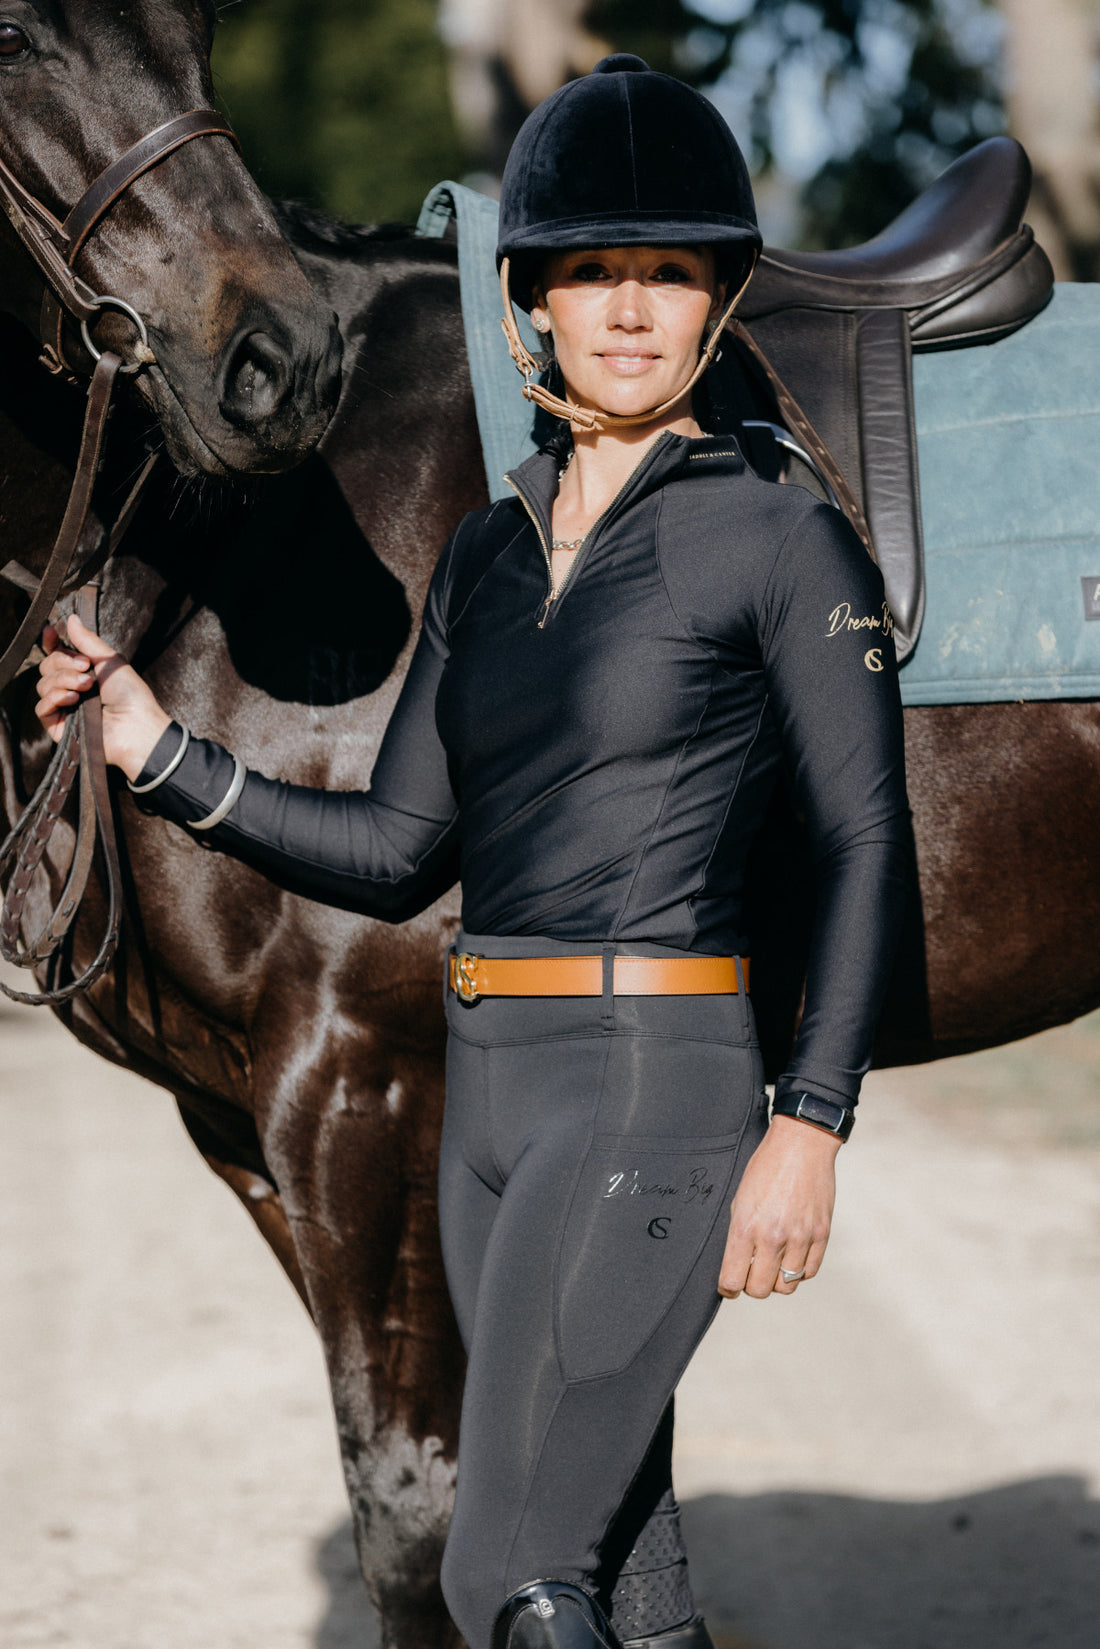 GucciEquestrianCollection-saddle  Equestrian outfits, Equestrian